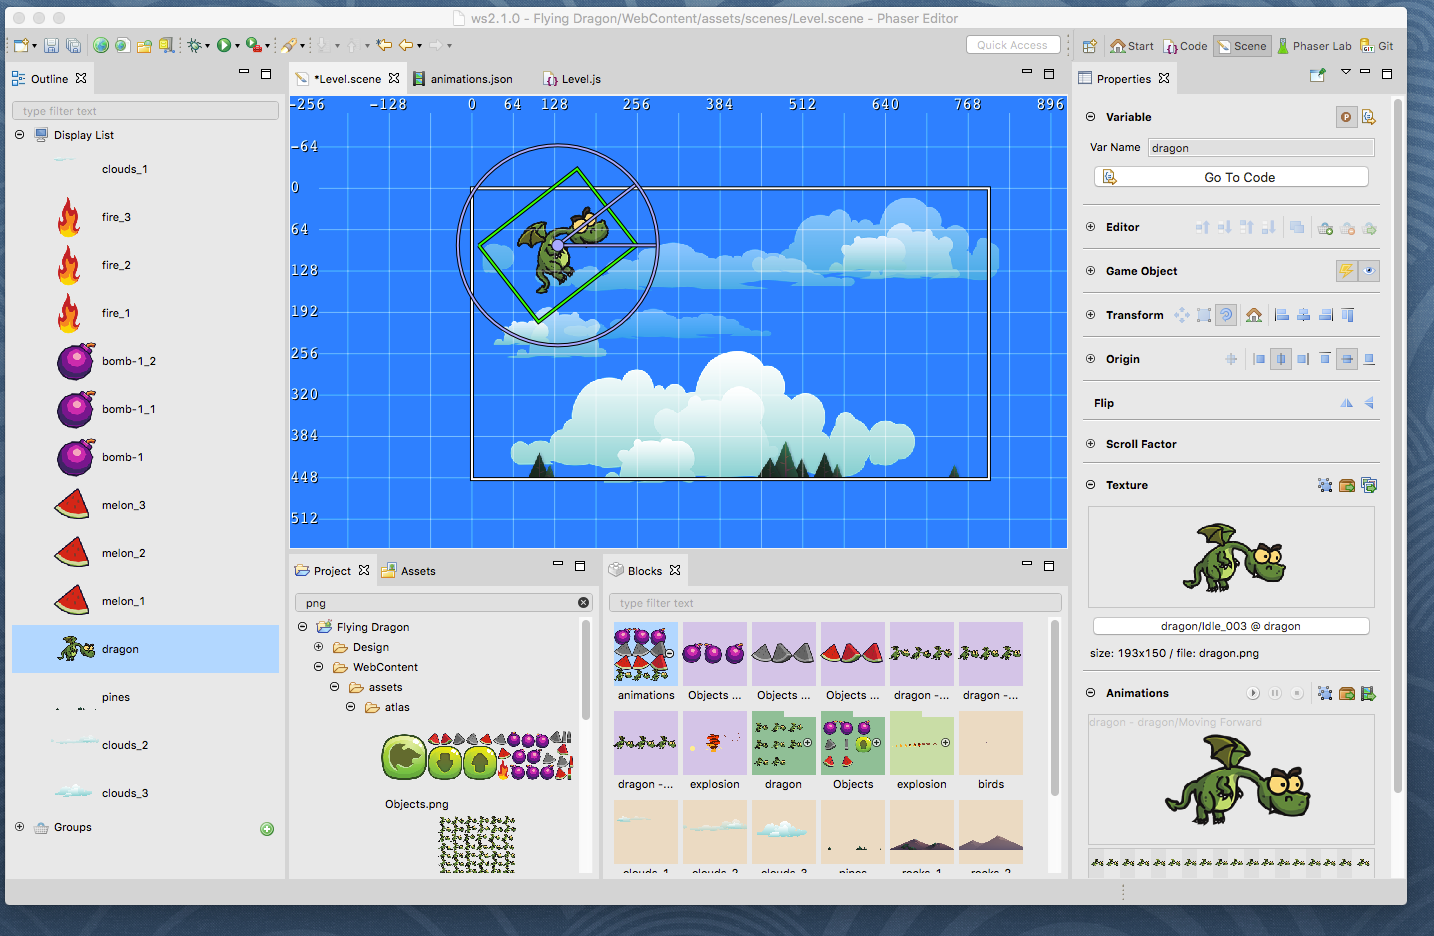 Phaser Editor 2.1.0 released